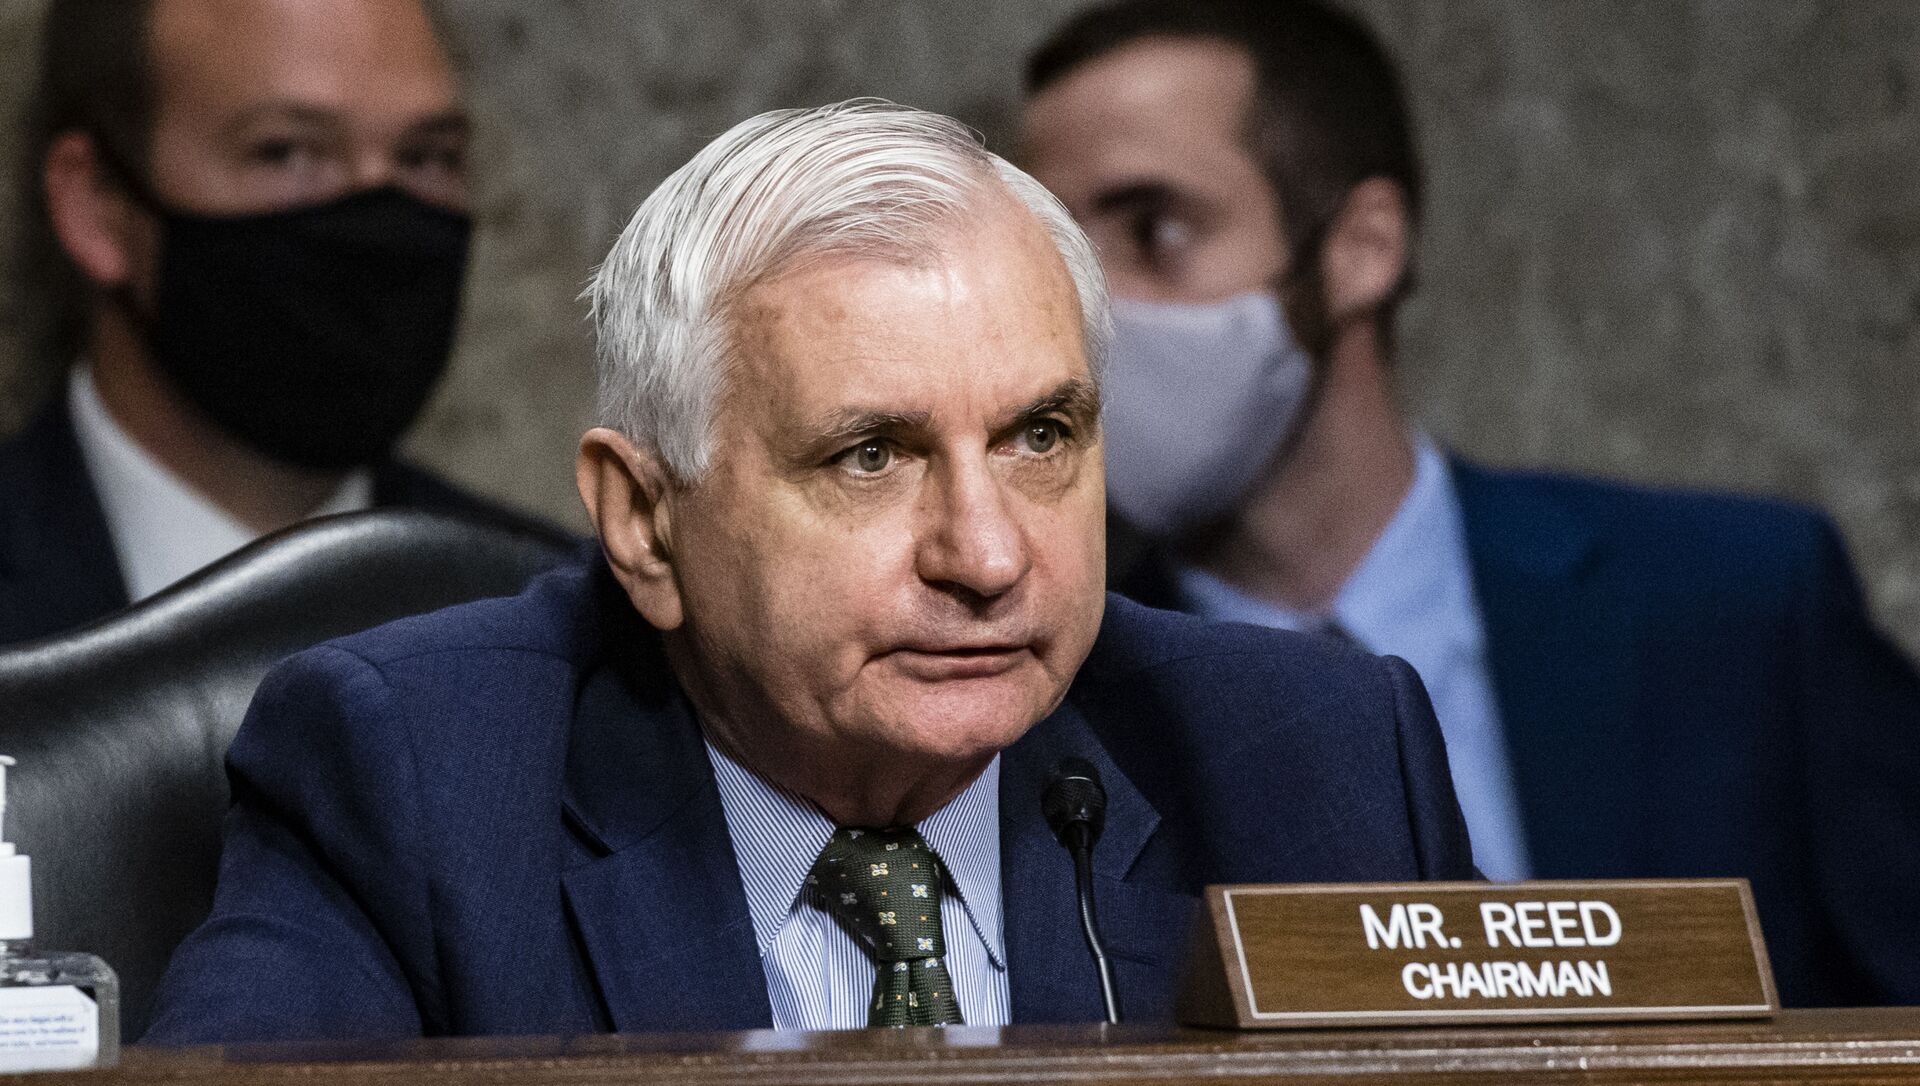 Senate Armed Services Committee Chairman Jack Reed, D-R.I., listens during a Senate Armed Services Hearing to examine worldwide threats on Capitol Hill, in Washington, Thursday, April 29, 2021. - Sputnik International, 1920, 11.05.2021